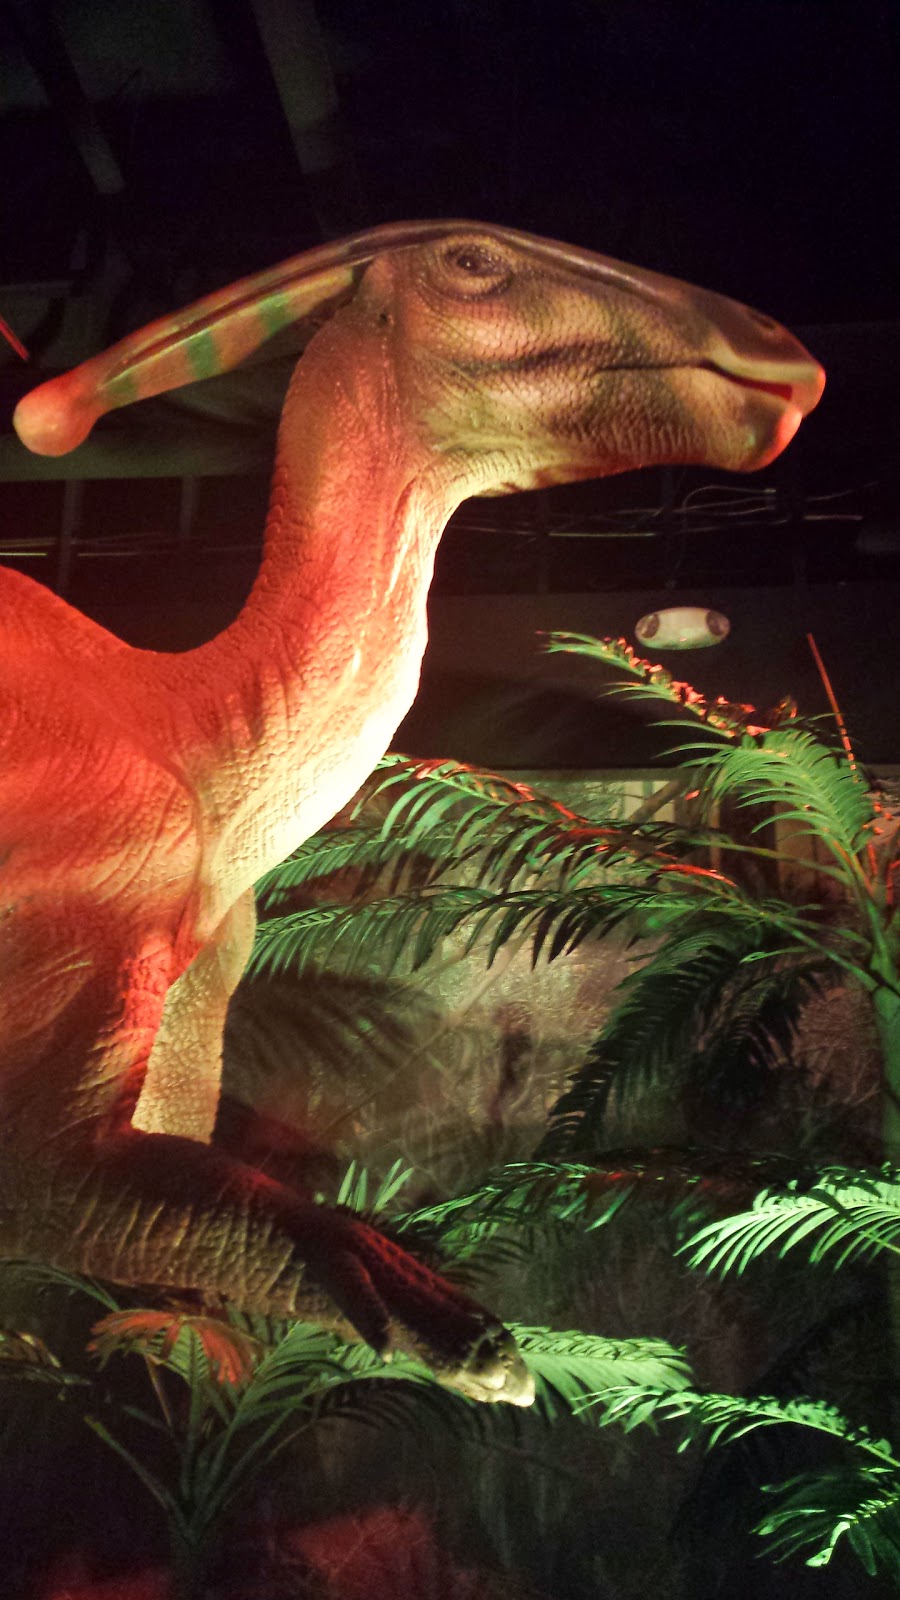 EXTREME DINOSAURS Exhibition​ in Atlanta Review via ProductReviewMom.com